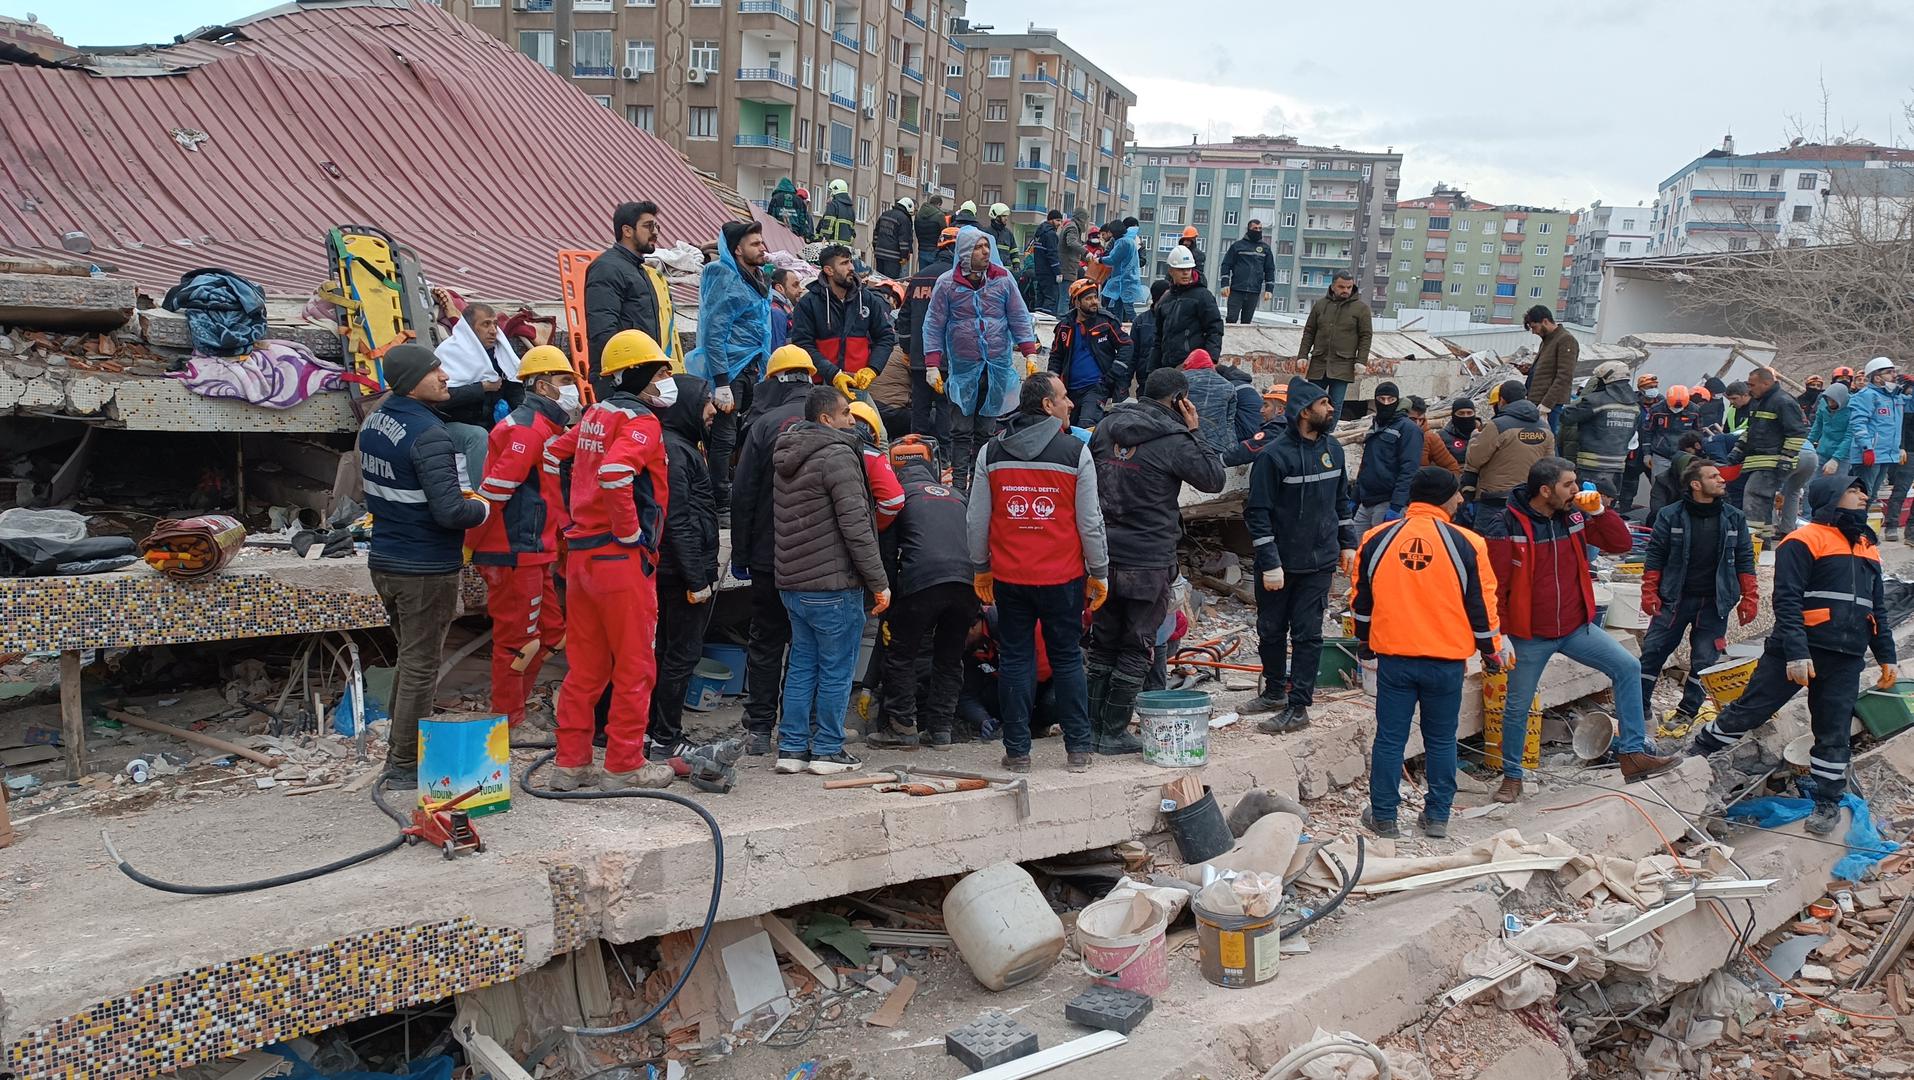 Civil defense workers and residents search through the rubble of collapsed building at Baglar distirct in Diyarbakir. A powerful earthquake has hit a wide area in eastern and south-eastern Turkey, near the Syrian border, killing more than 2000 people and trapping many others. Diyarbakir, Turkey, on February 06, 2023. Photo by Muhammed Furkan Arslanoglu/Depo Photos/ABACAPRESS.COM Photo: Depo Photos/ABACA/ABACA